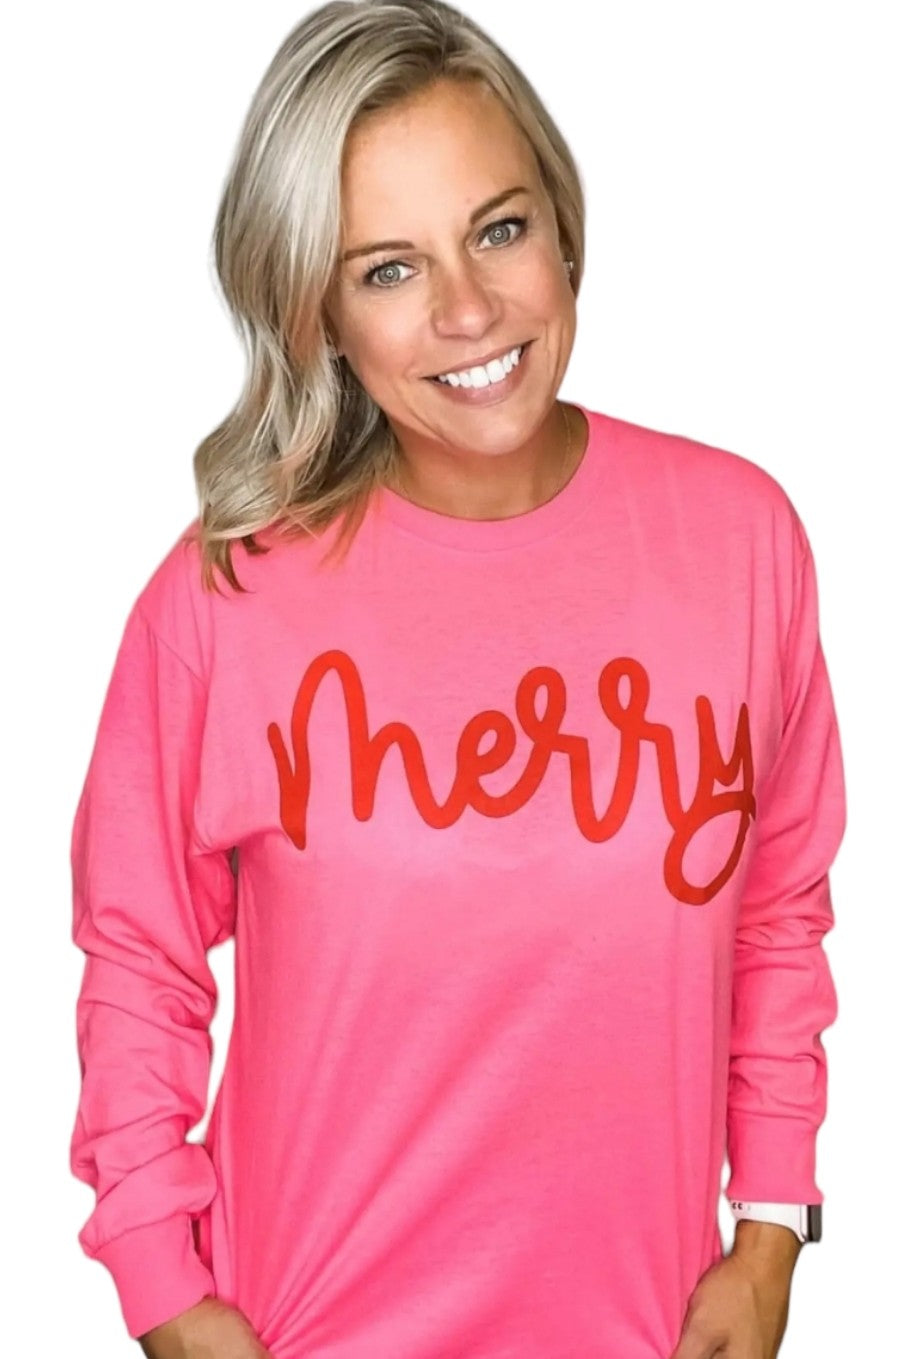 MERRY NEON Pink LONG SLEEVE HOLIDAY GRAPHIC TEE